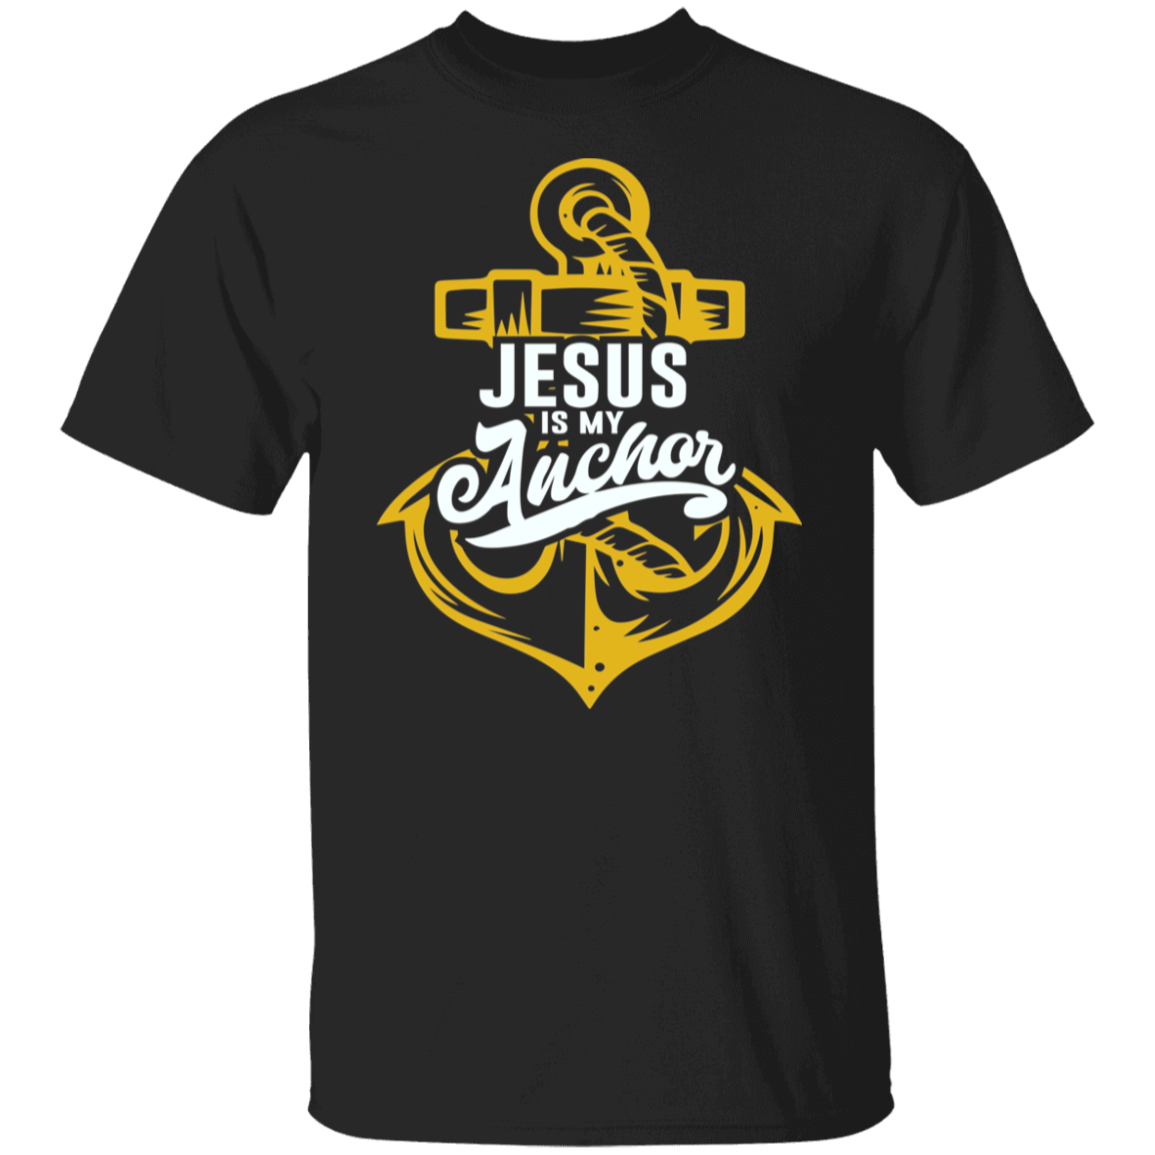 Jesus Is My Anchor T-Shirt